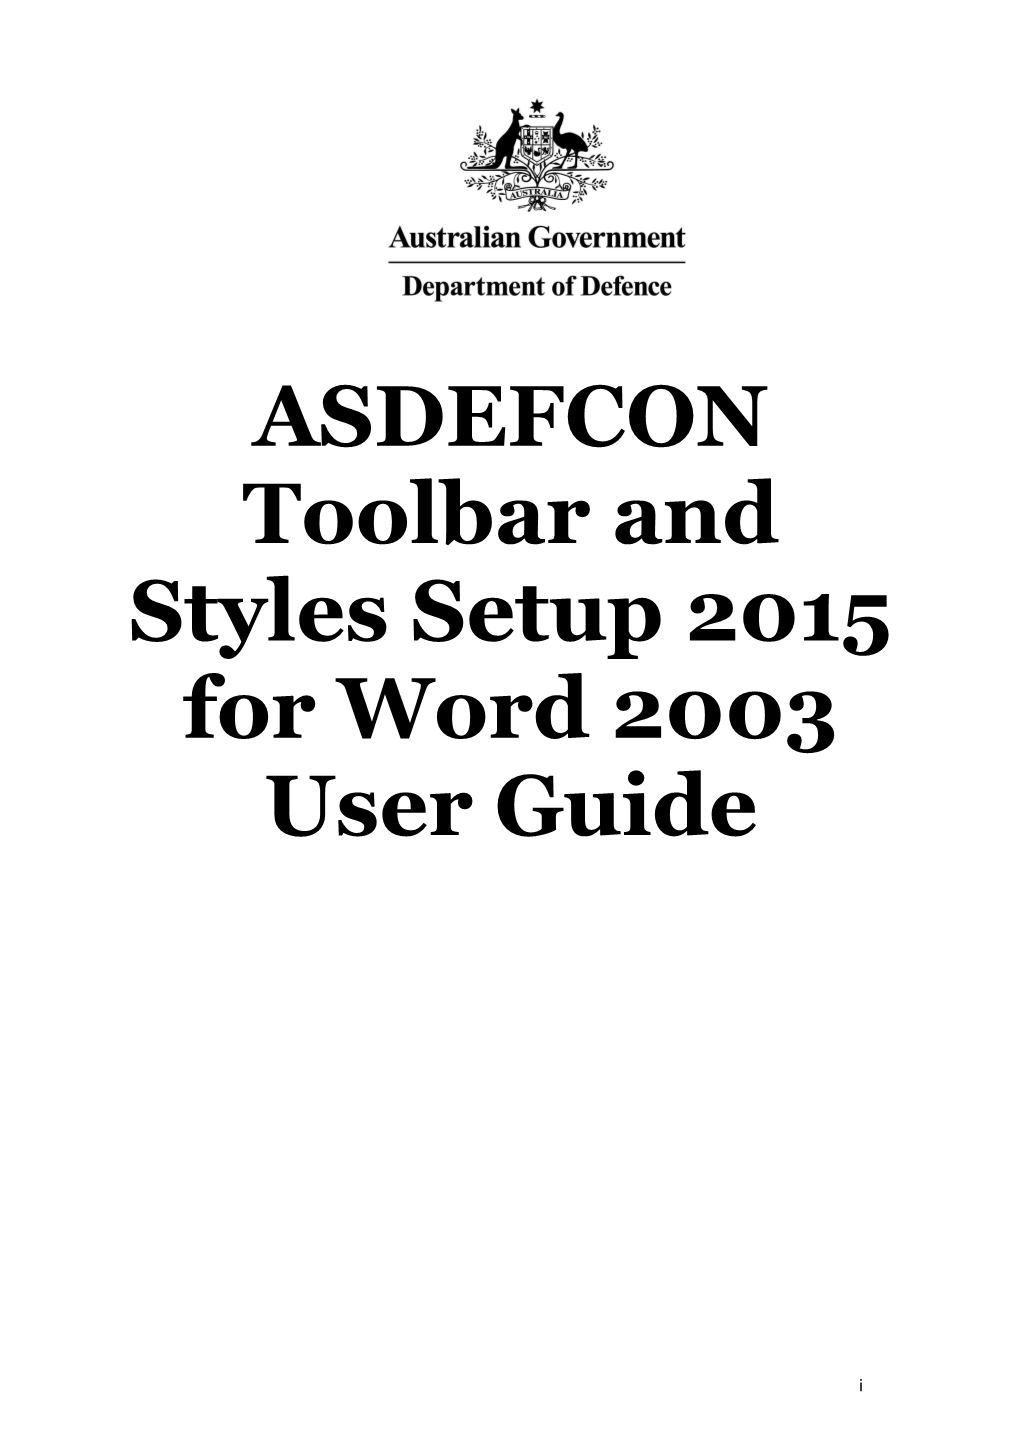 ASDEFCON Toolbar and Styles Setup 2015 for Word 2003 User Guide